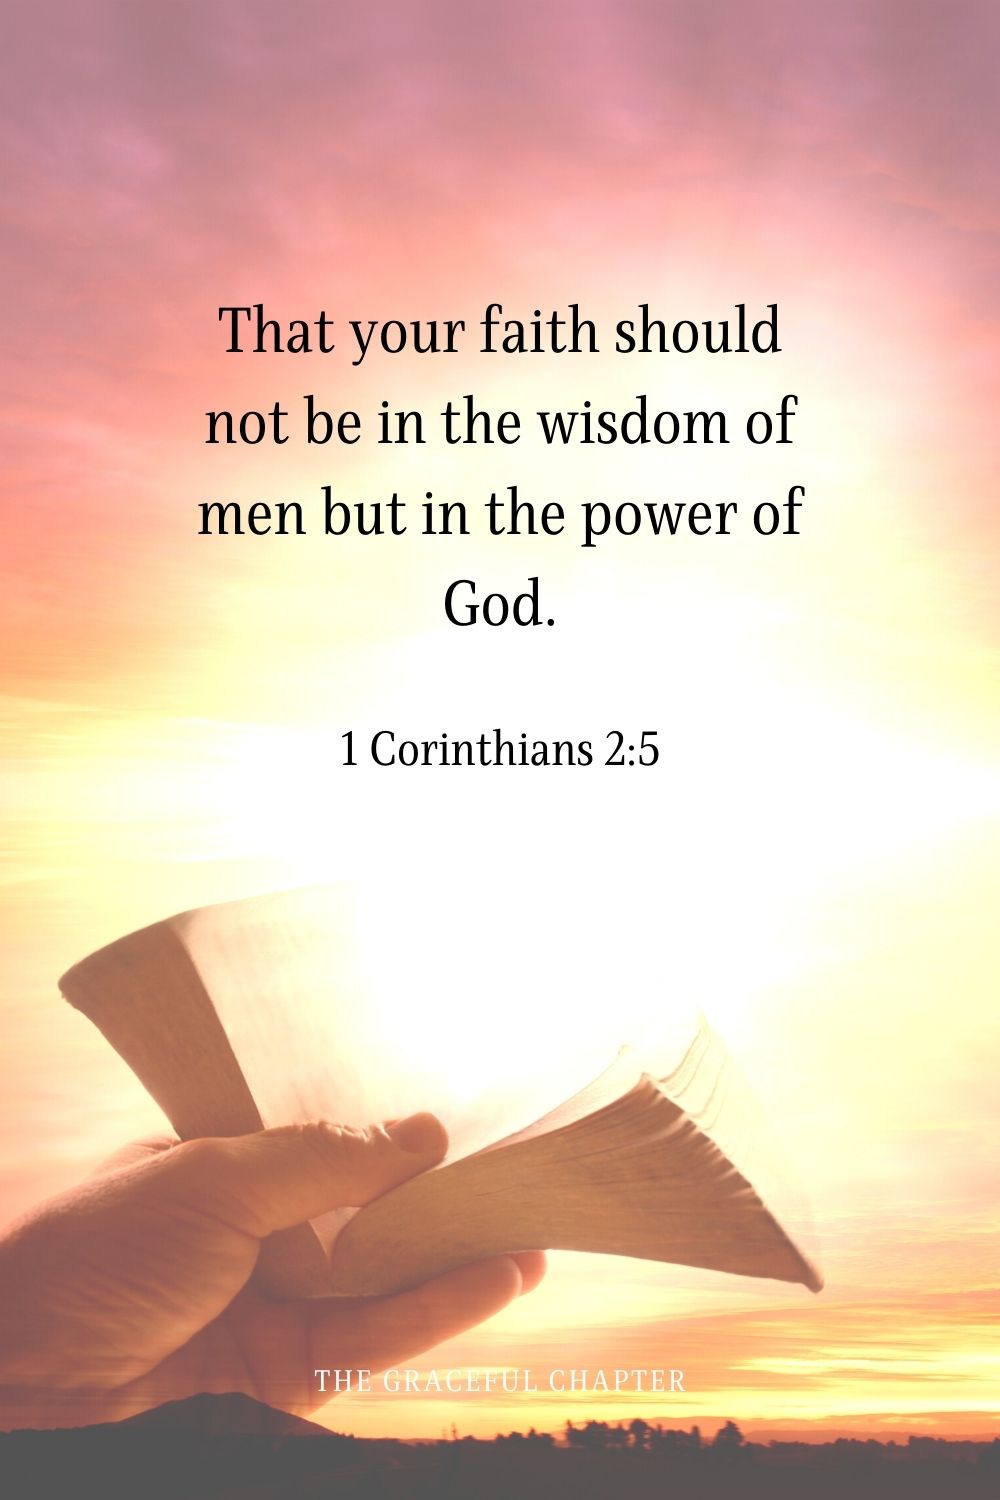 That your faith should not be in the wisdom of men but in the power of God.